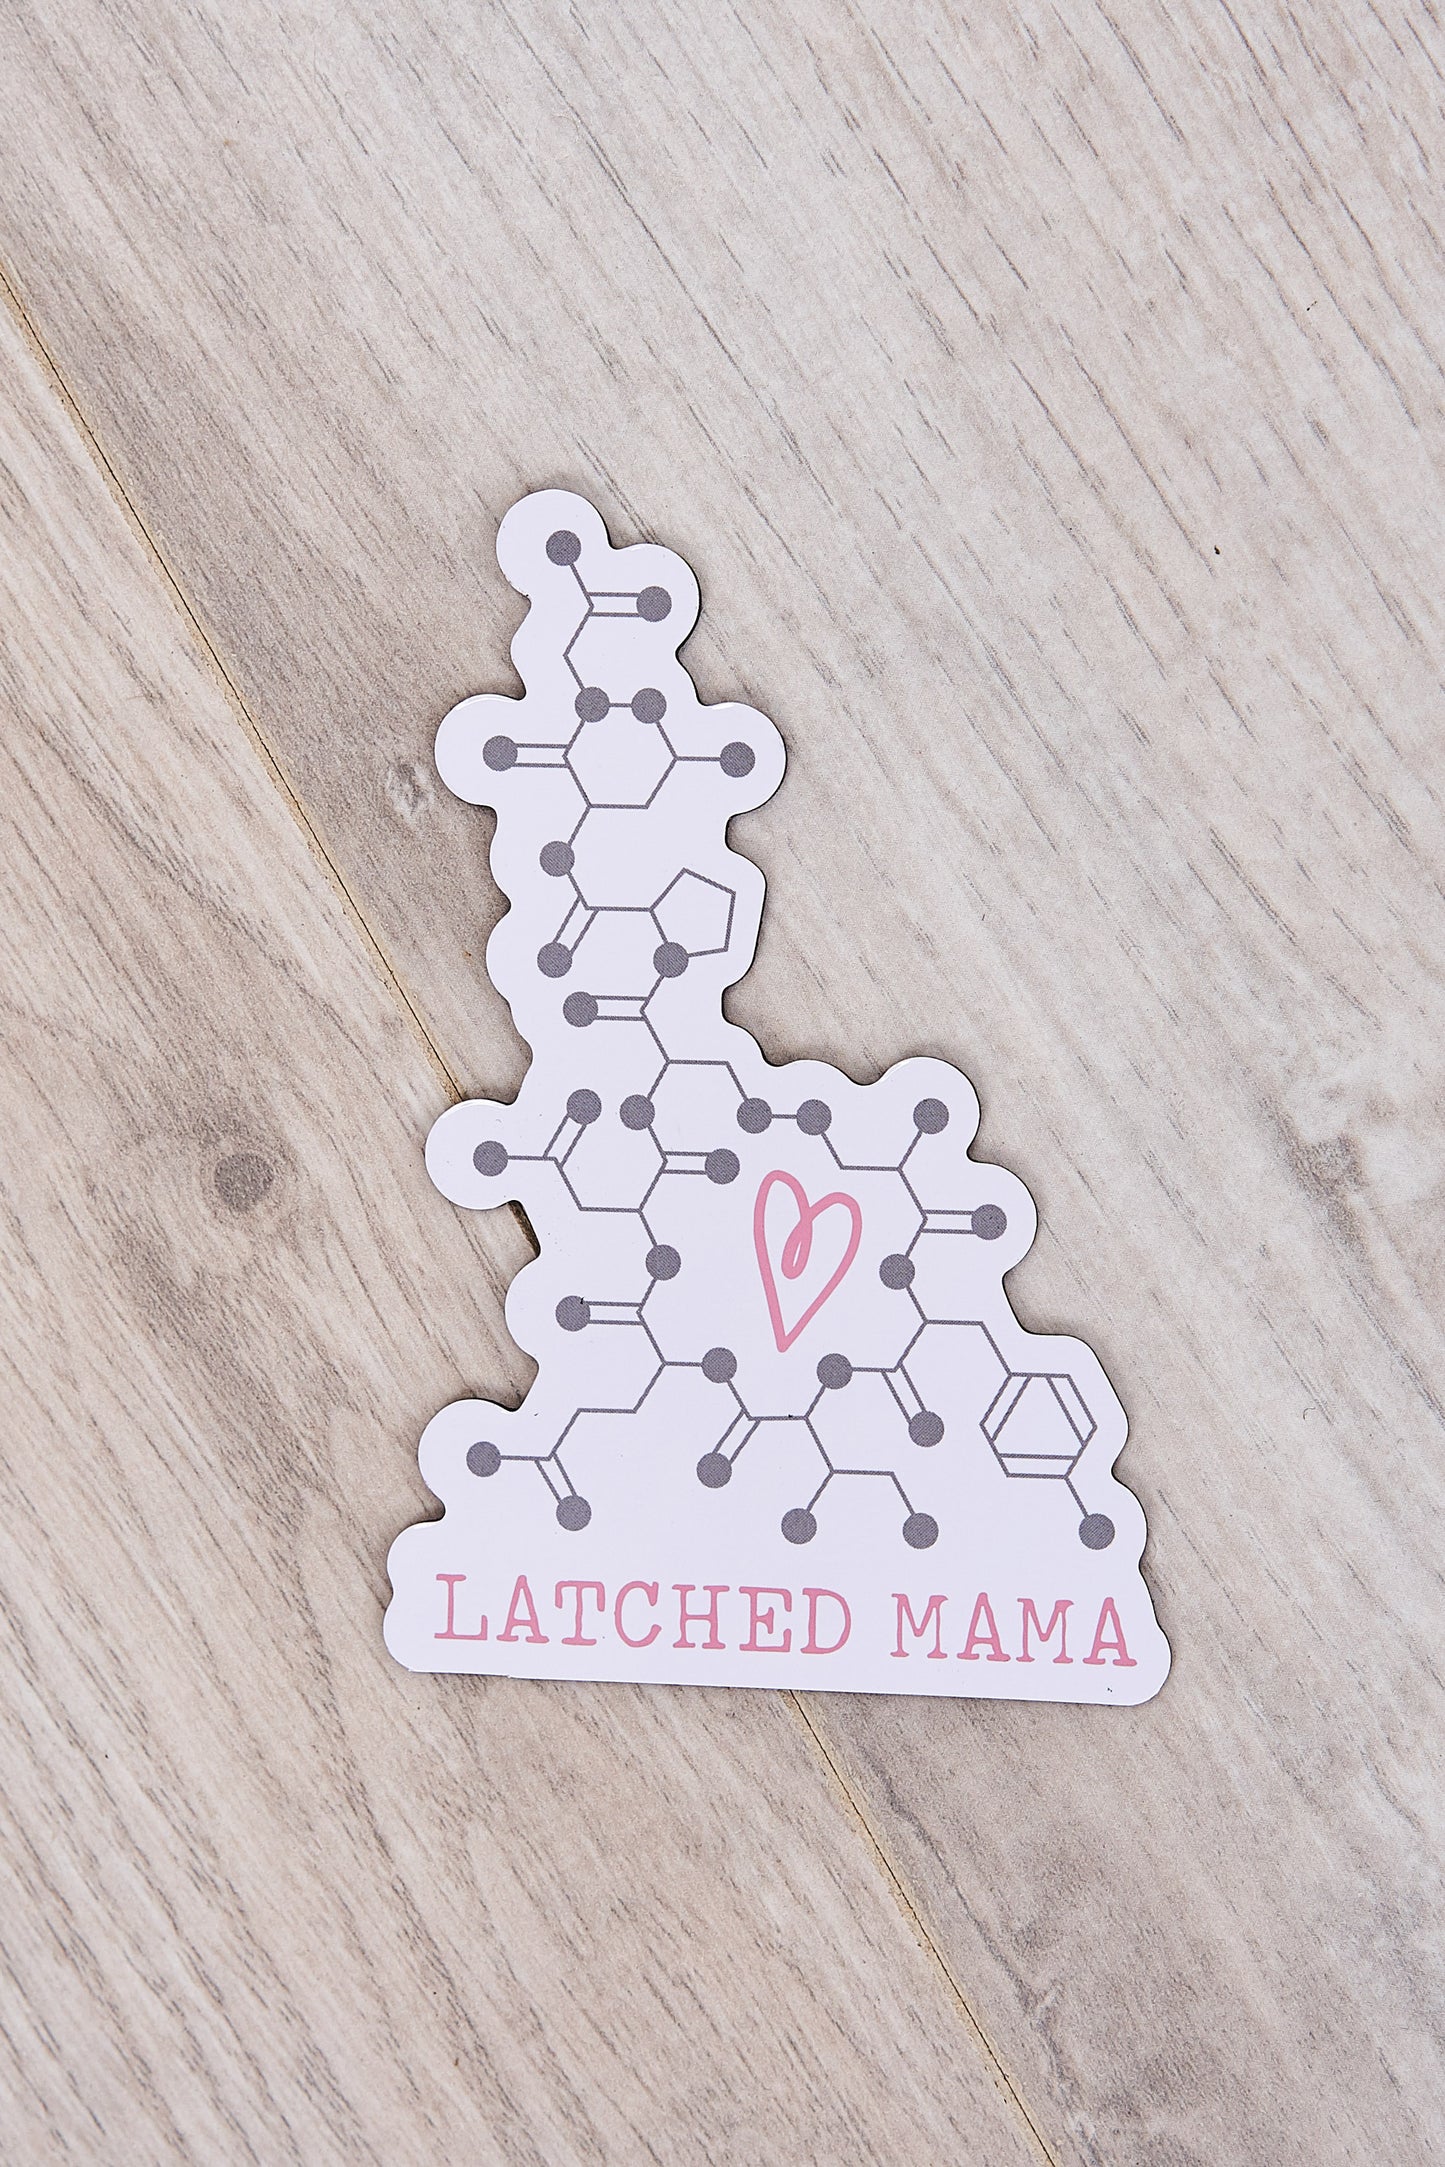 Latched Mama Ultimate Magnet Pack